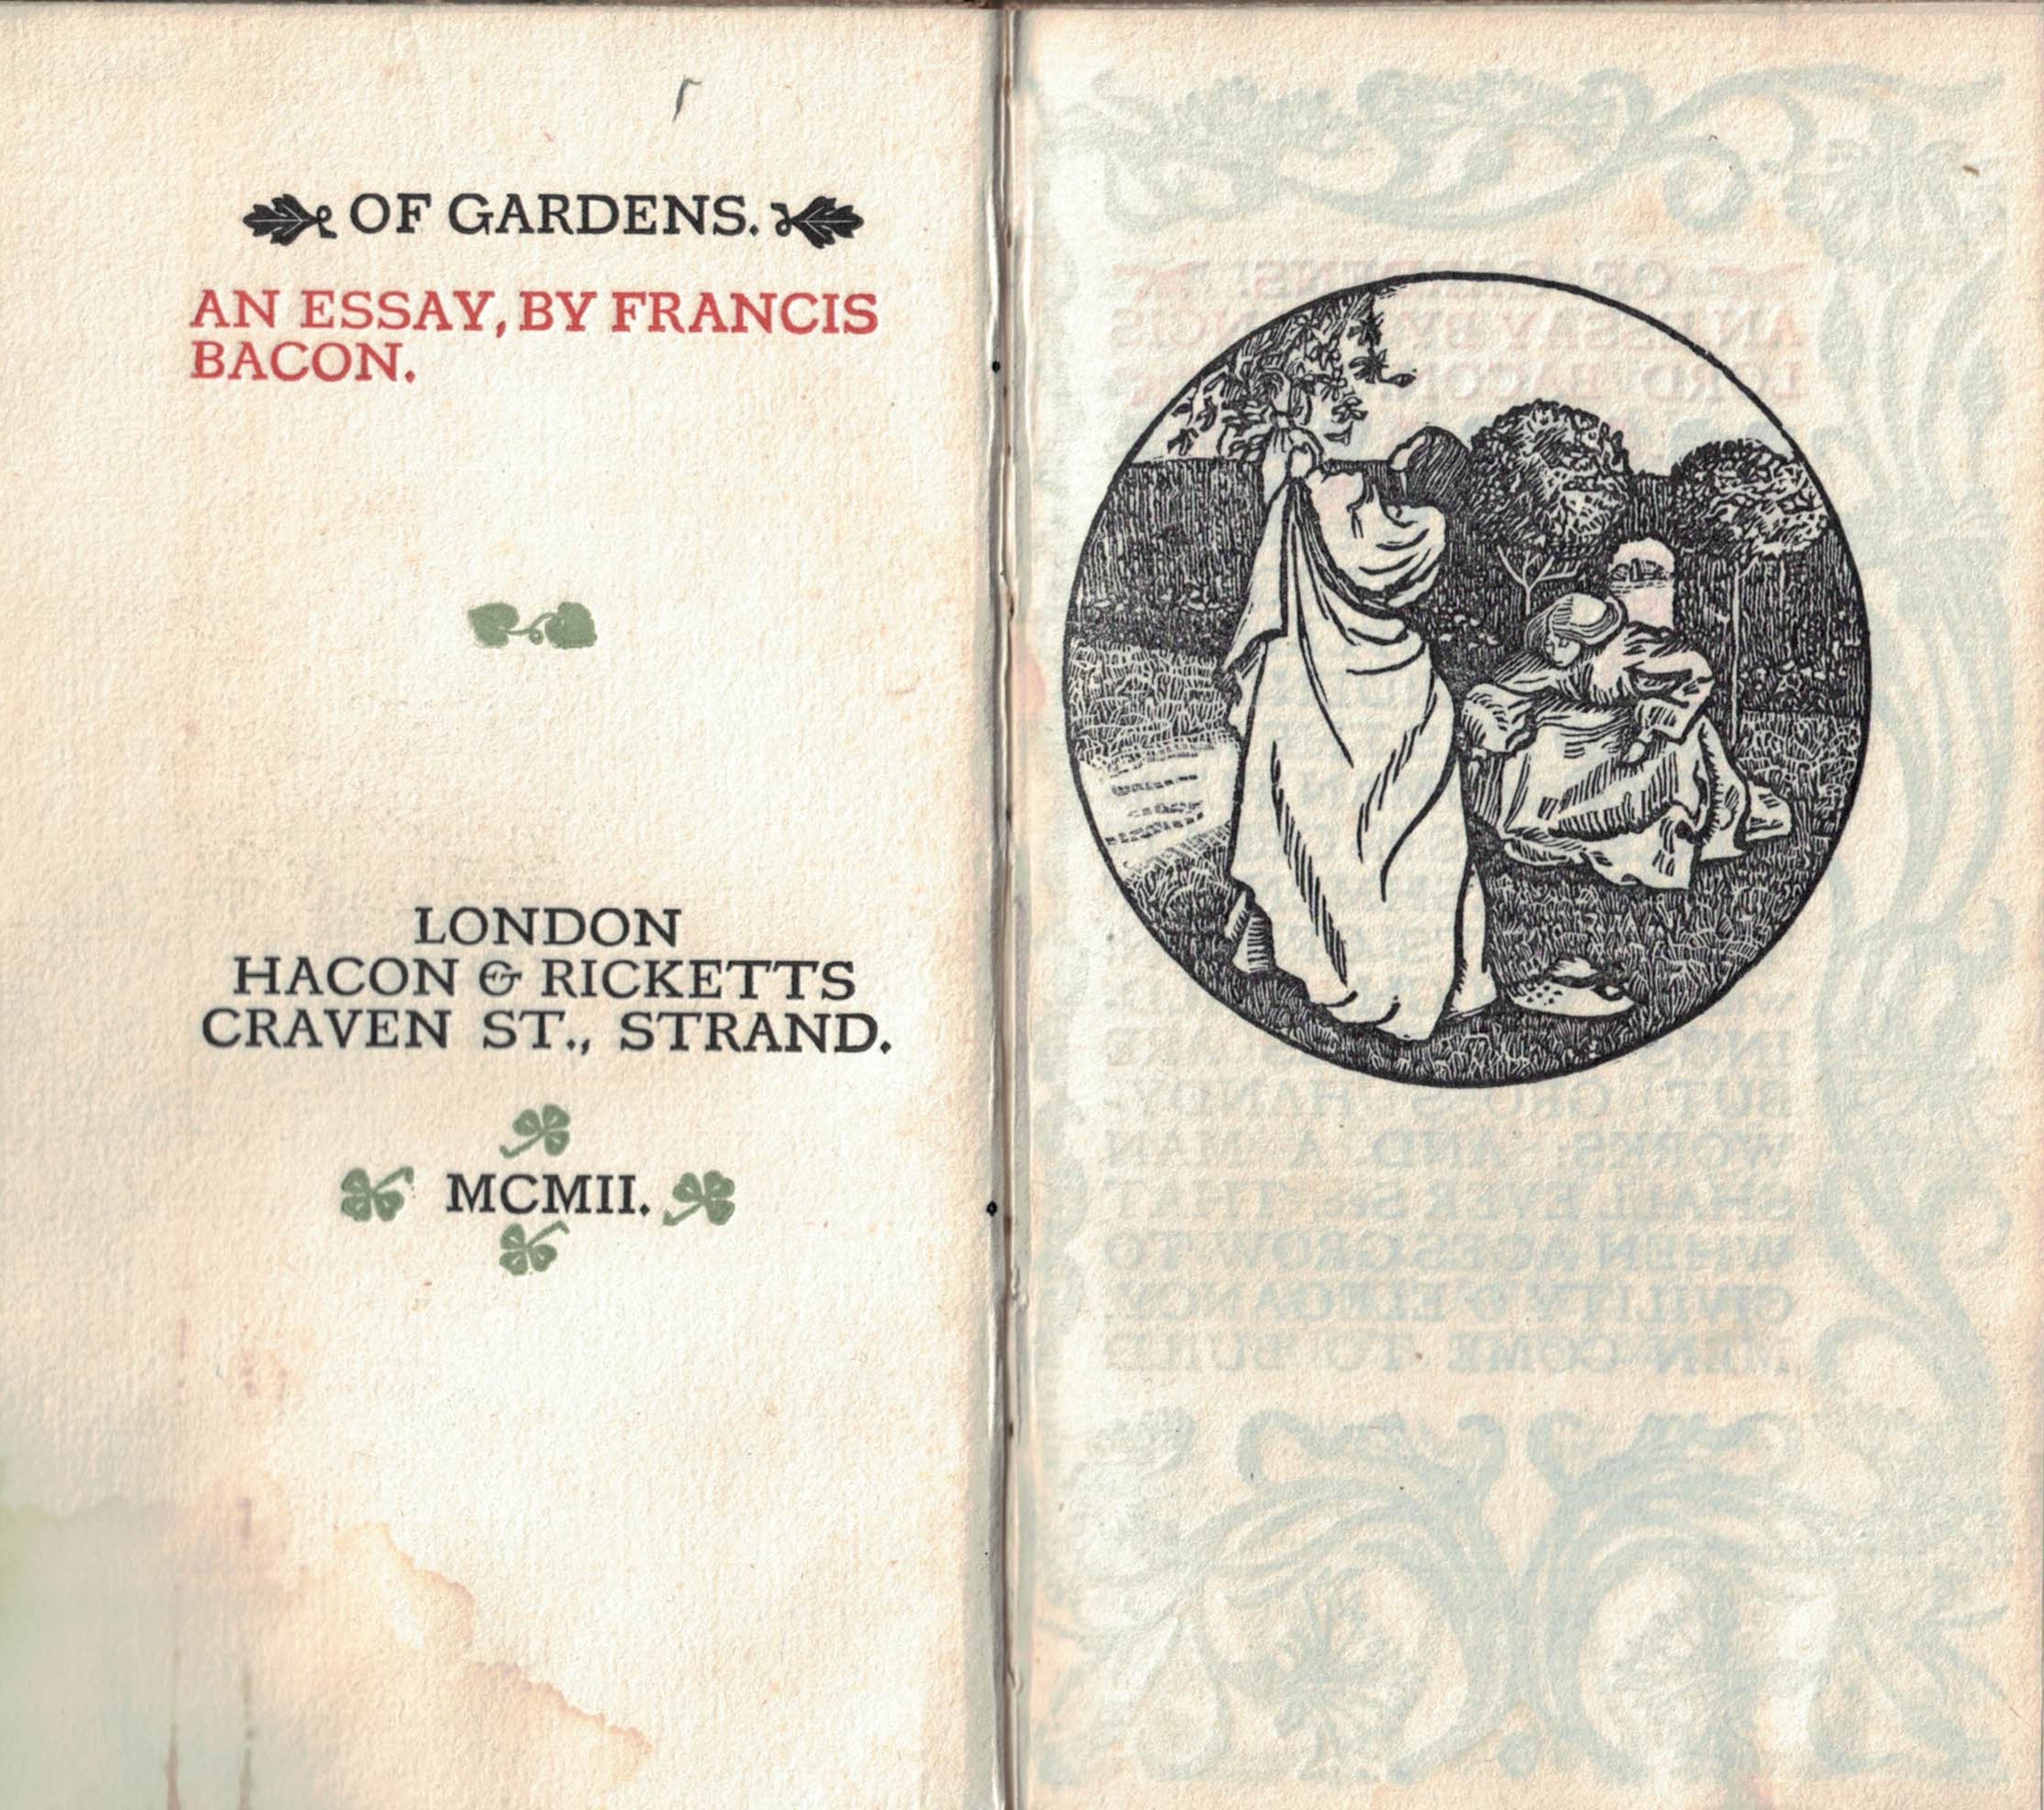 Of Gardens. Limited edition.